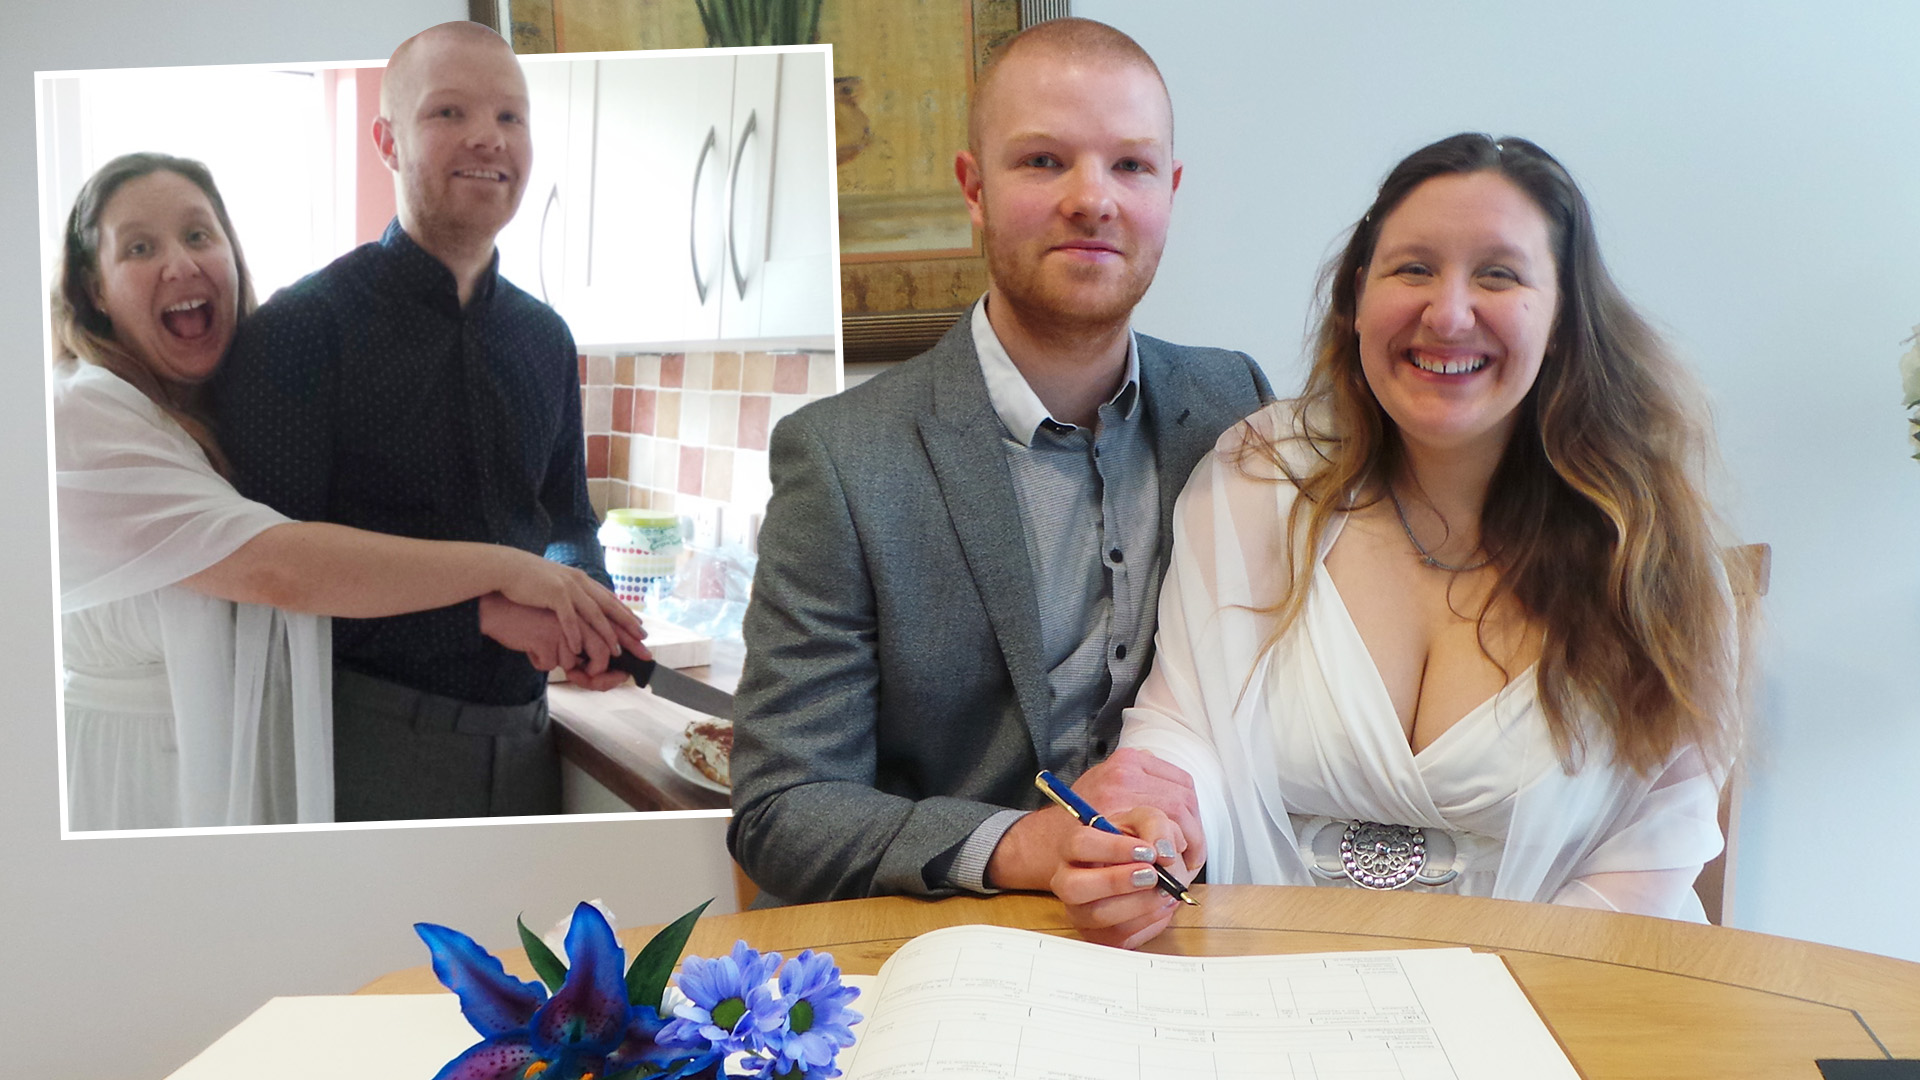 Redefining Weddings: How I Nixed Family, Found a £12 Dress, and Cut a £9 Cake – SEO-Optimized Wedding Story